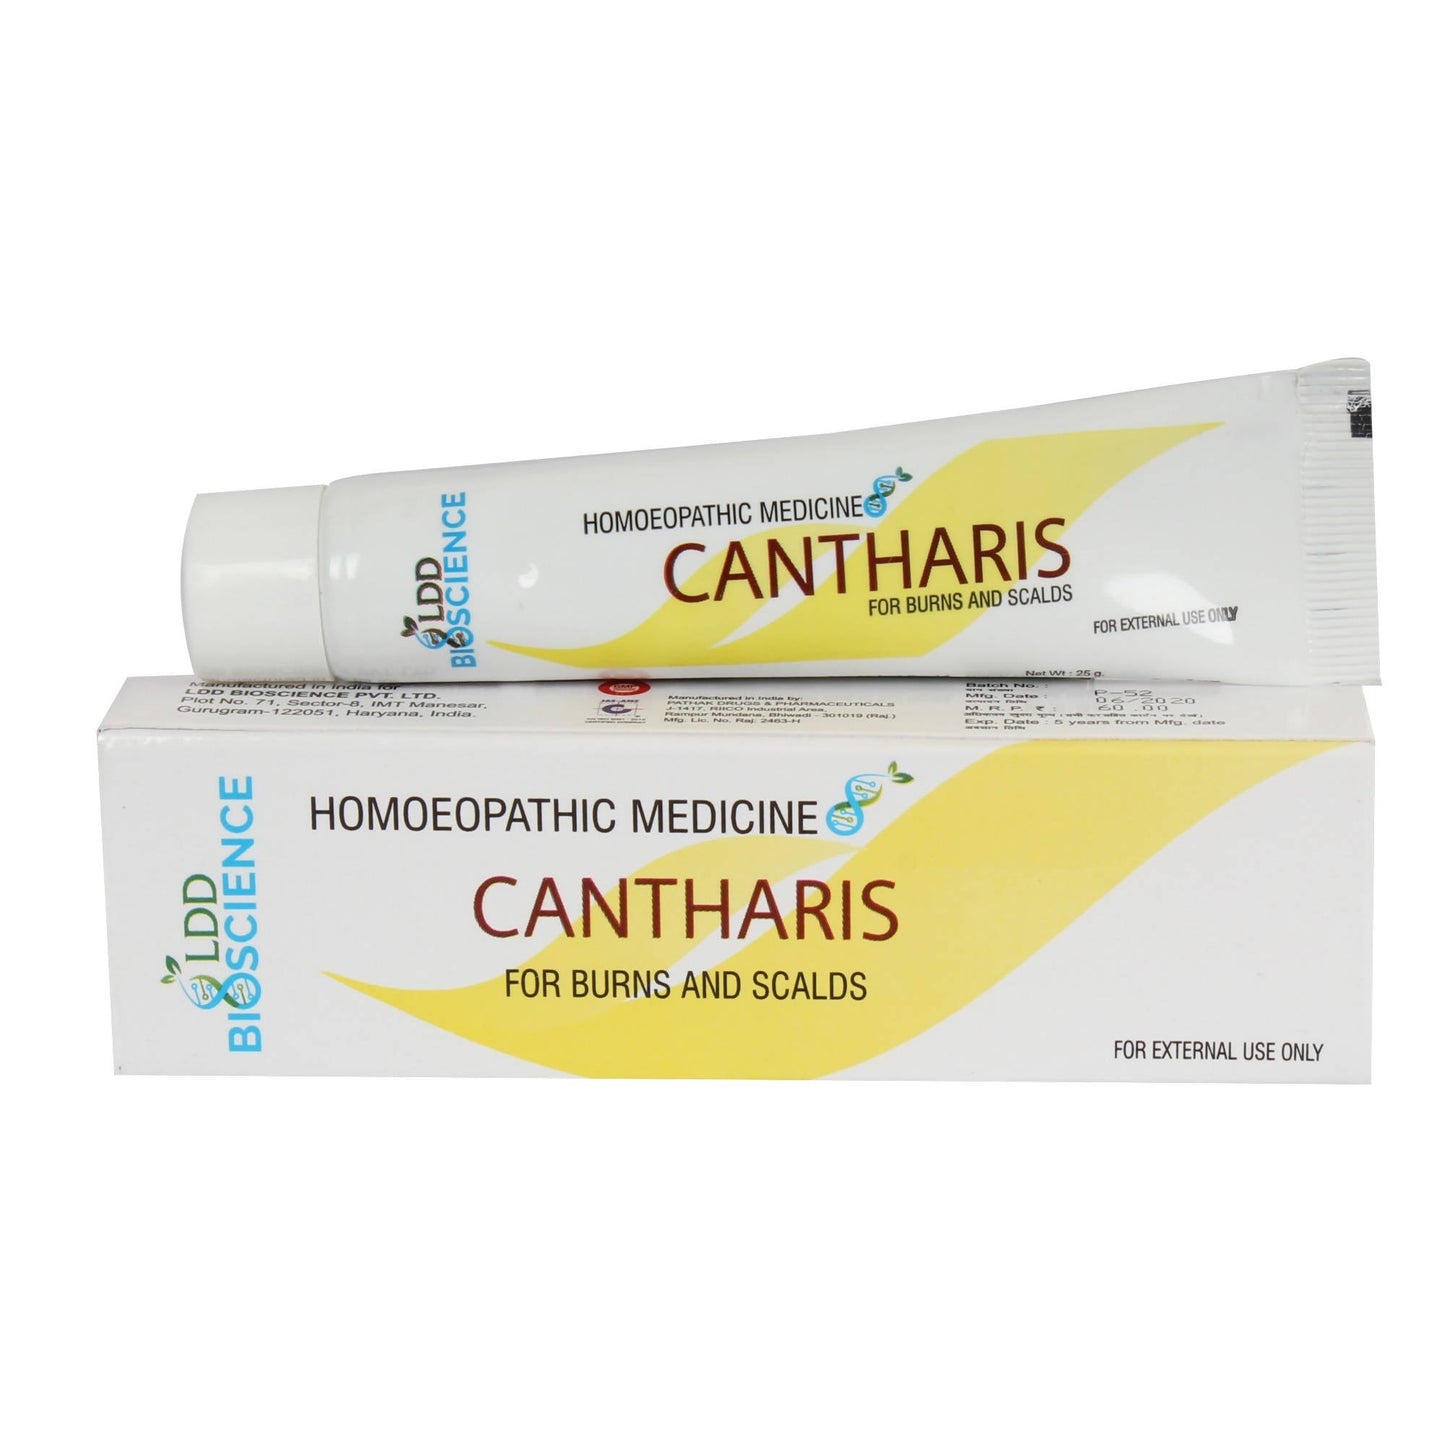 LDD Bioscience Homeopathy Cantharis Ointment